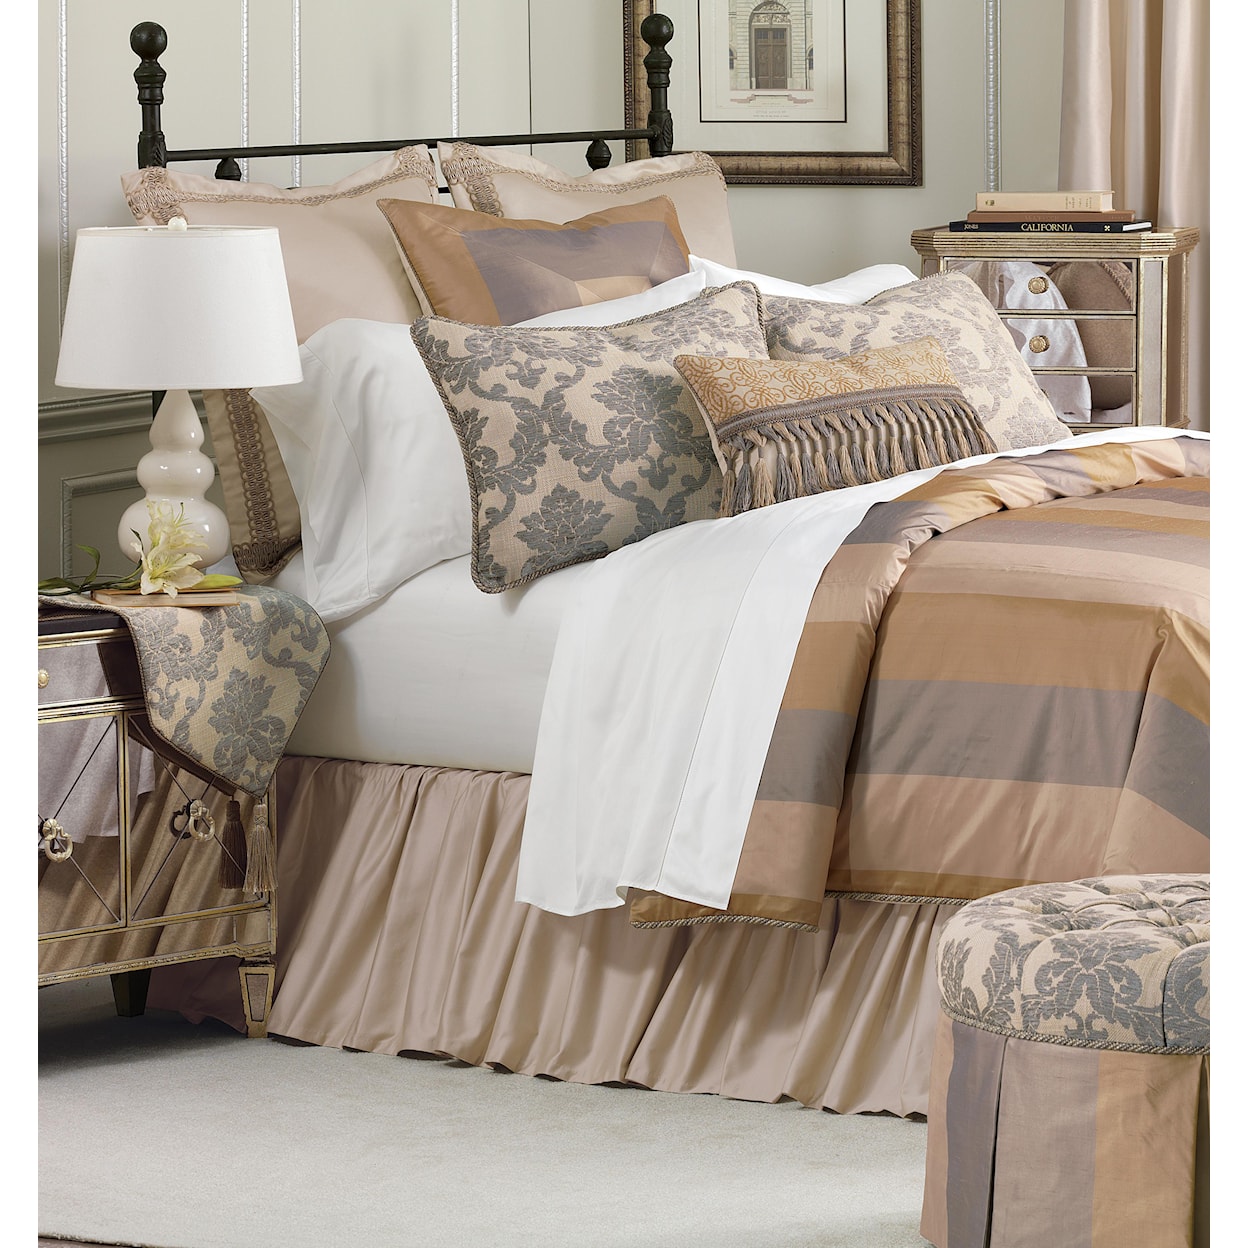 Eastern Accents Lancaster Cal King Bedset